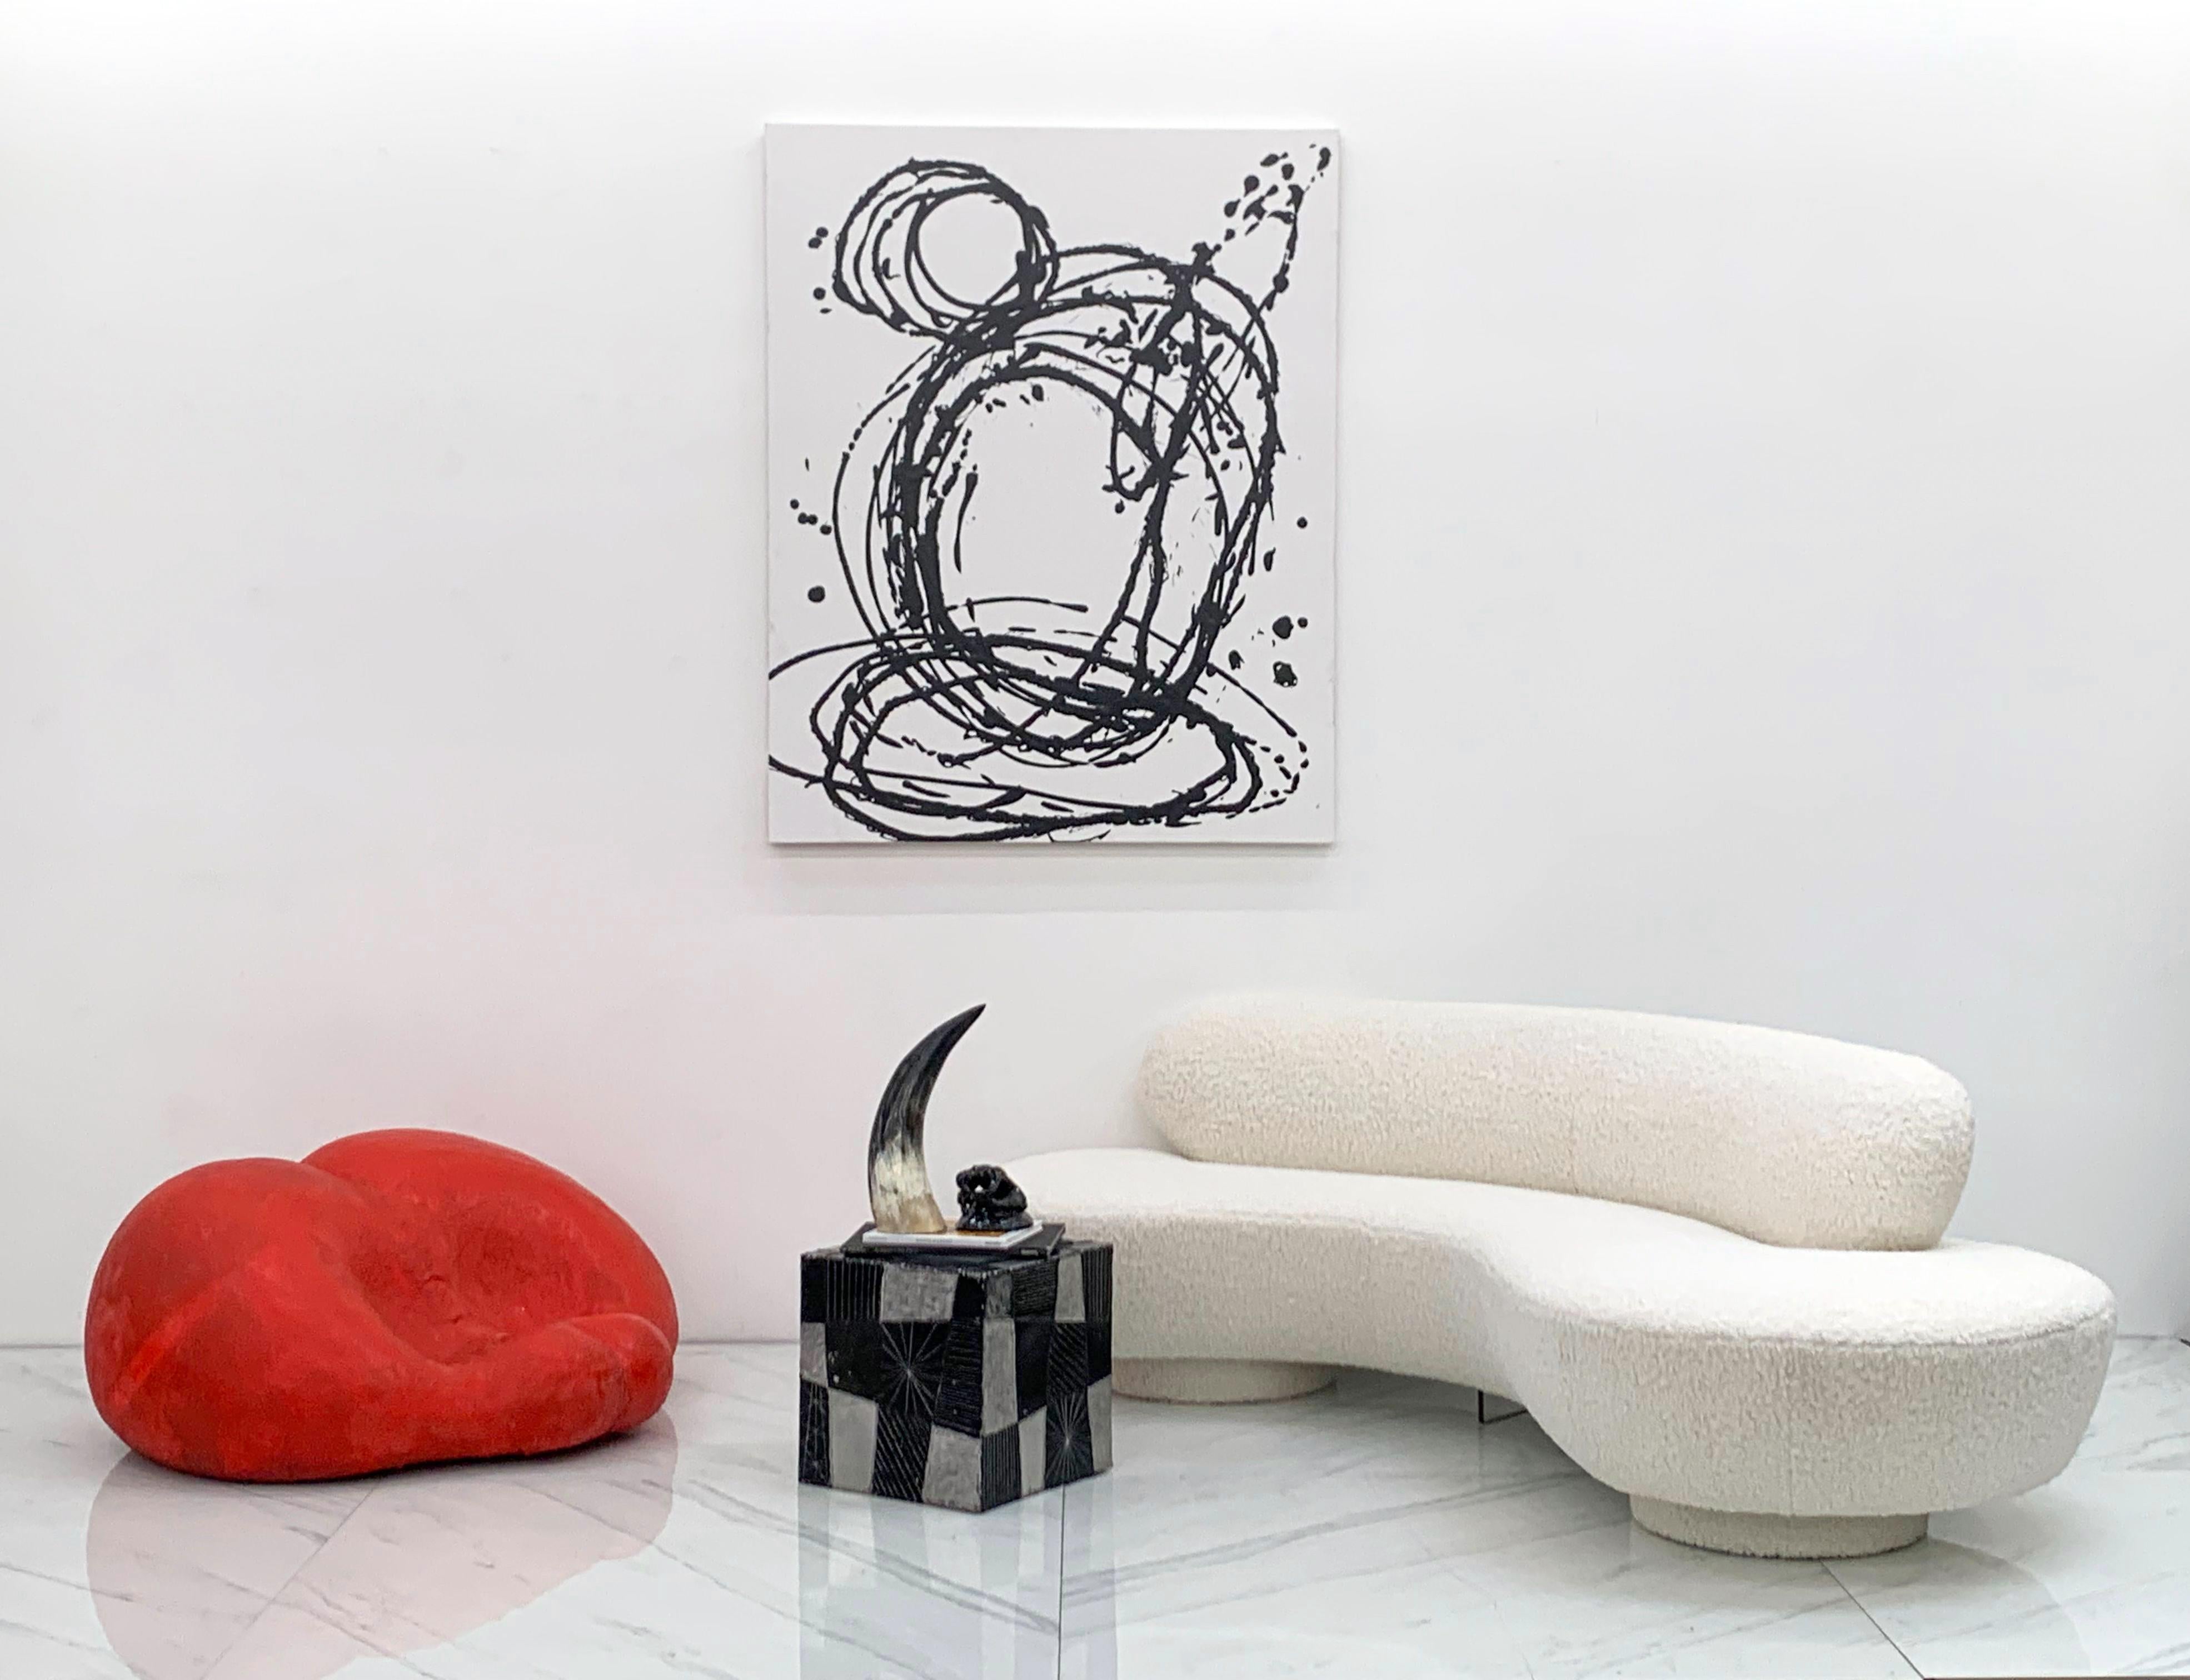 Designed and crafted by French Pop Artist, Luois Durot, this piece is sure going to be a conversation piece. Is it a tongue? Is it a bum? It's called the Pouffesses chair and it's definitely a fun piece that makes a bold statement in any